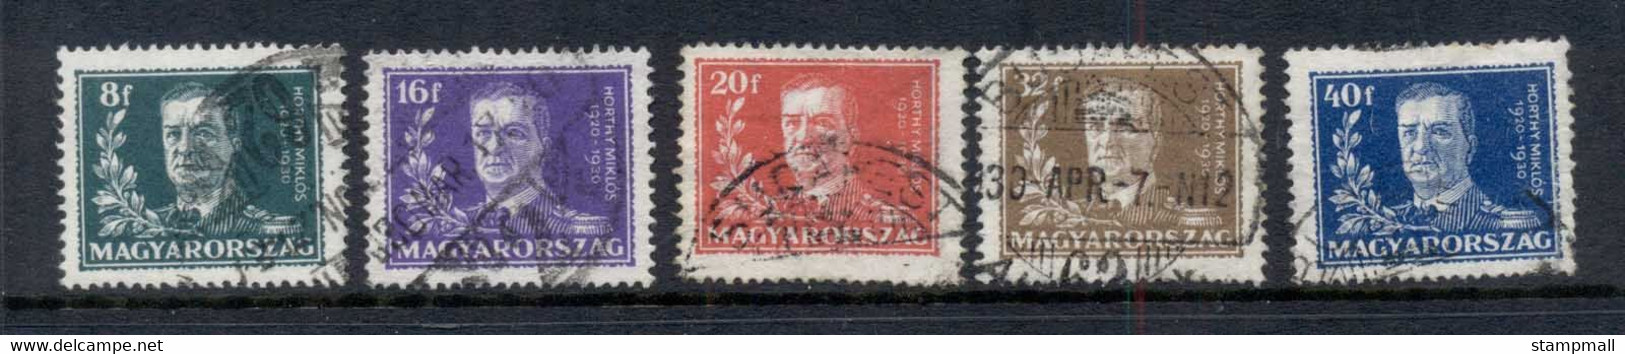 Hungary 1930 Admiral Nicholas Horthy FU - Used Stamps